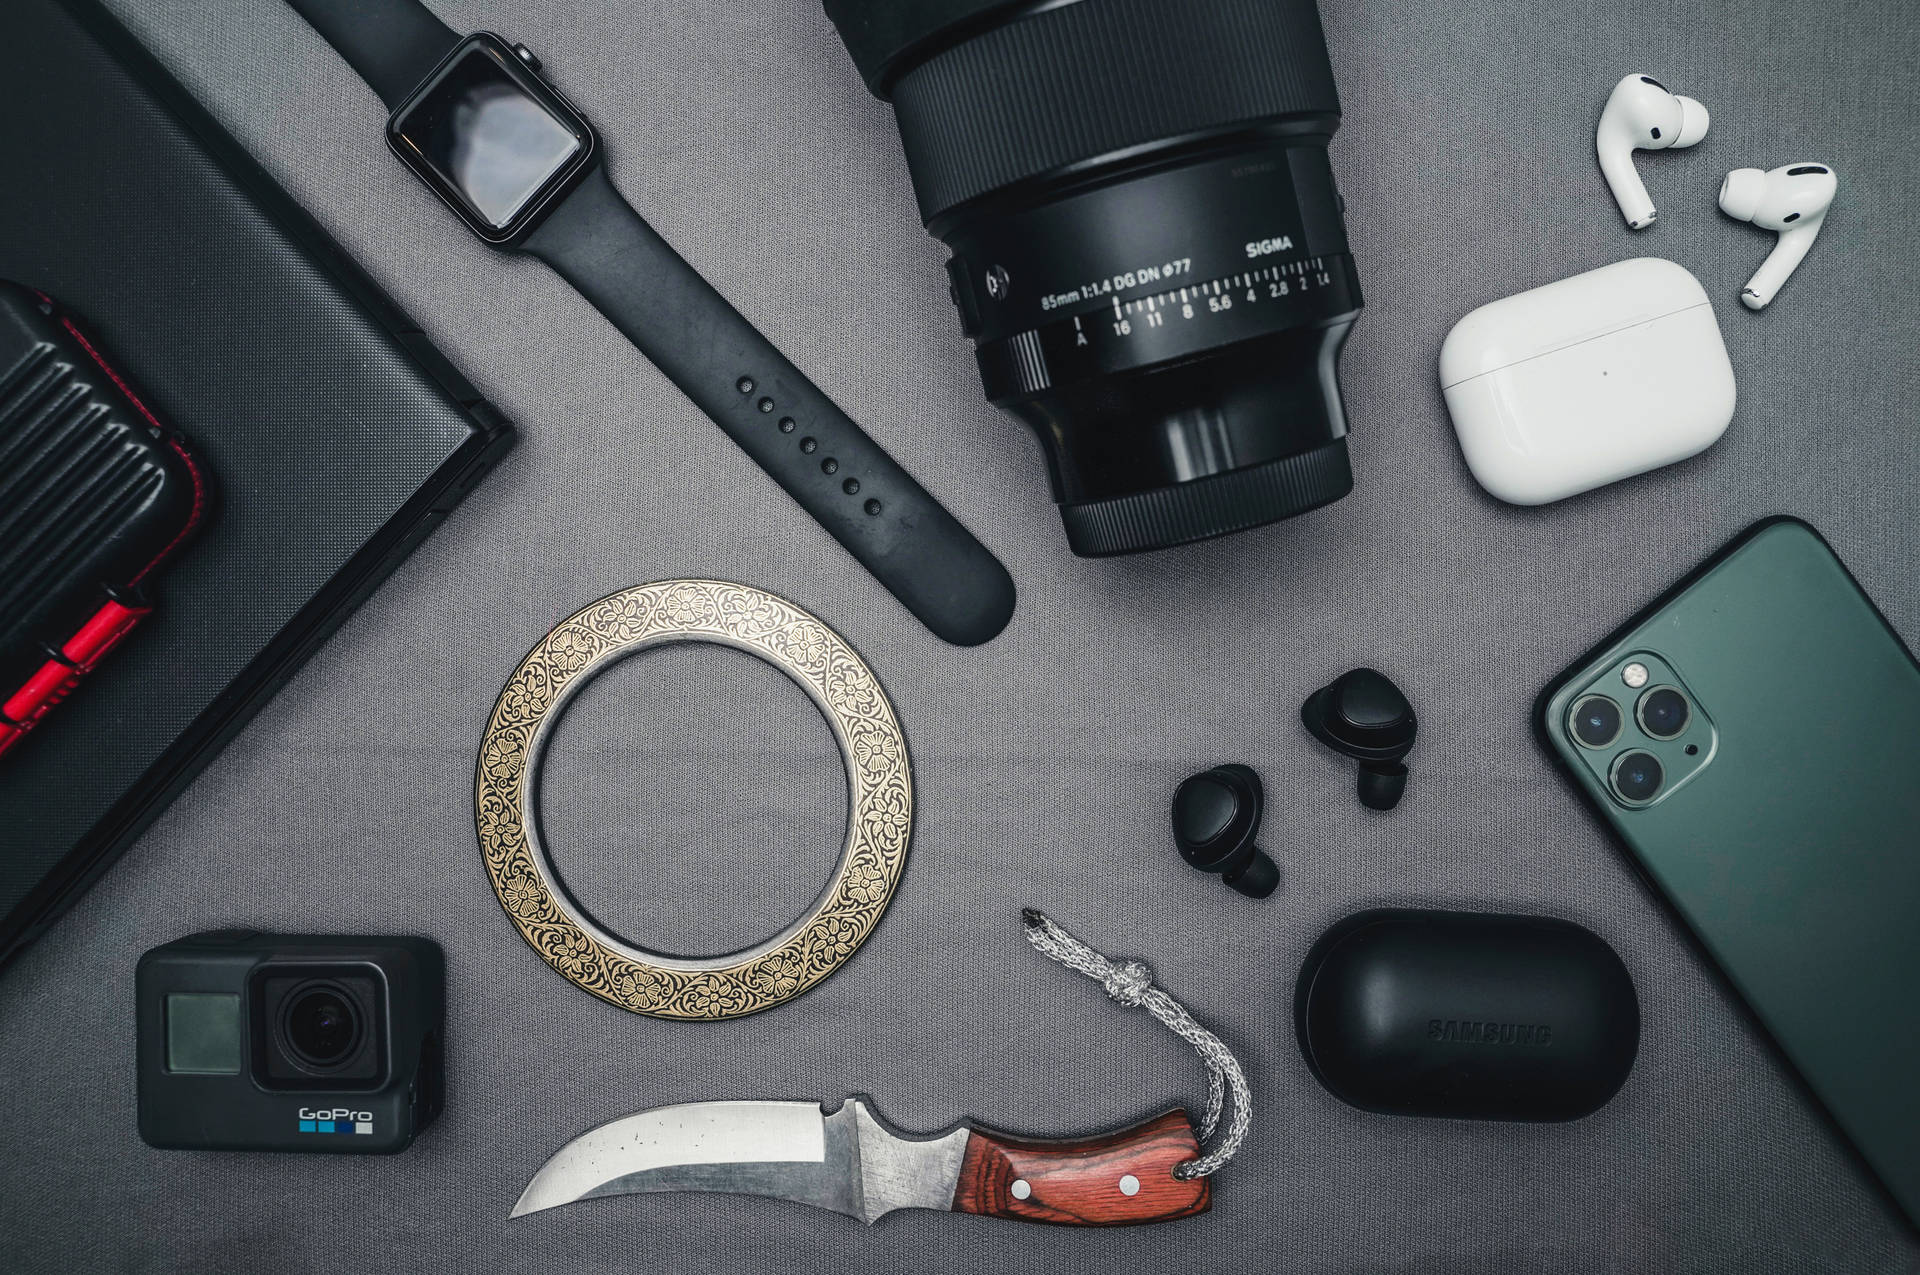 Gopro With Manly Items Wallpaper